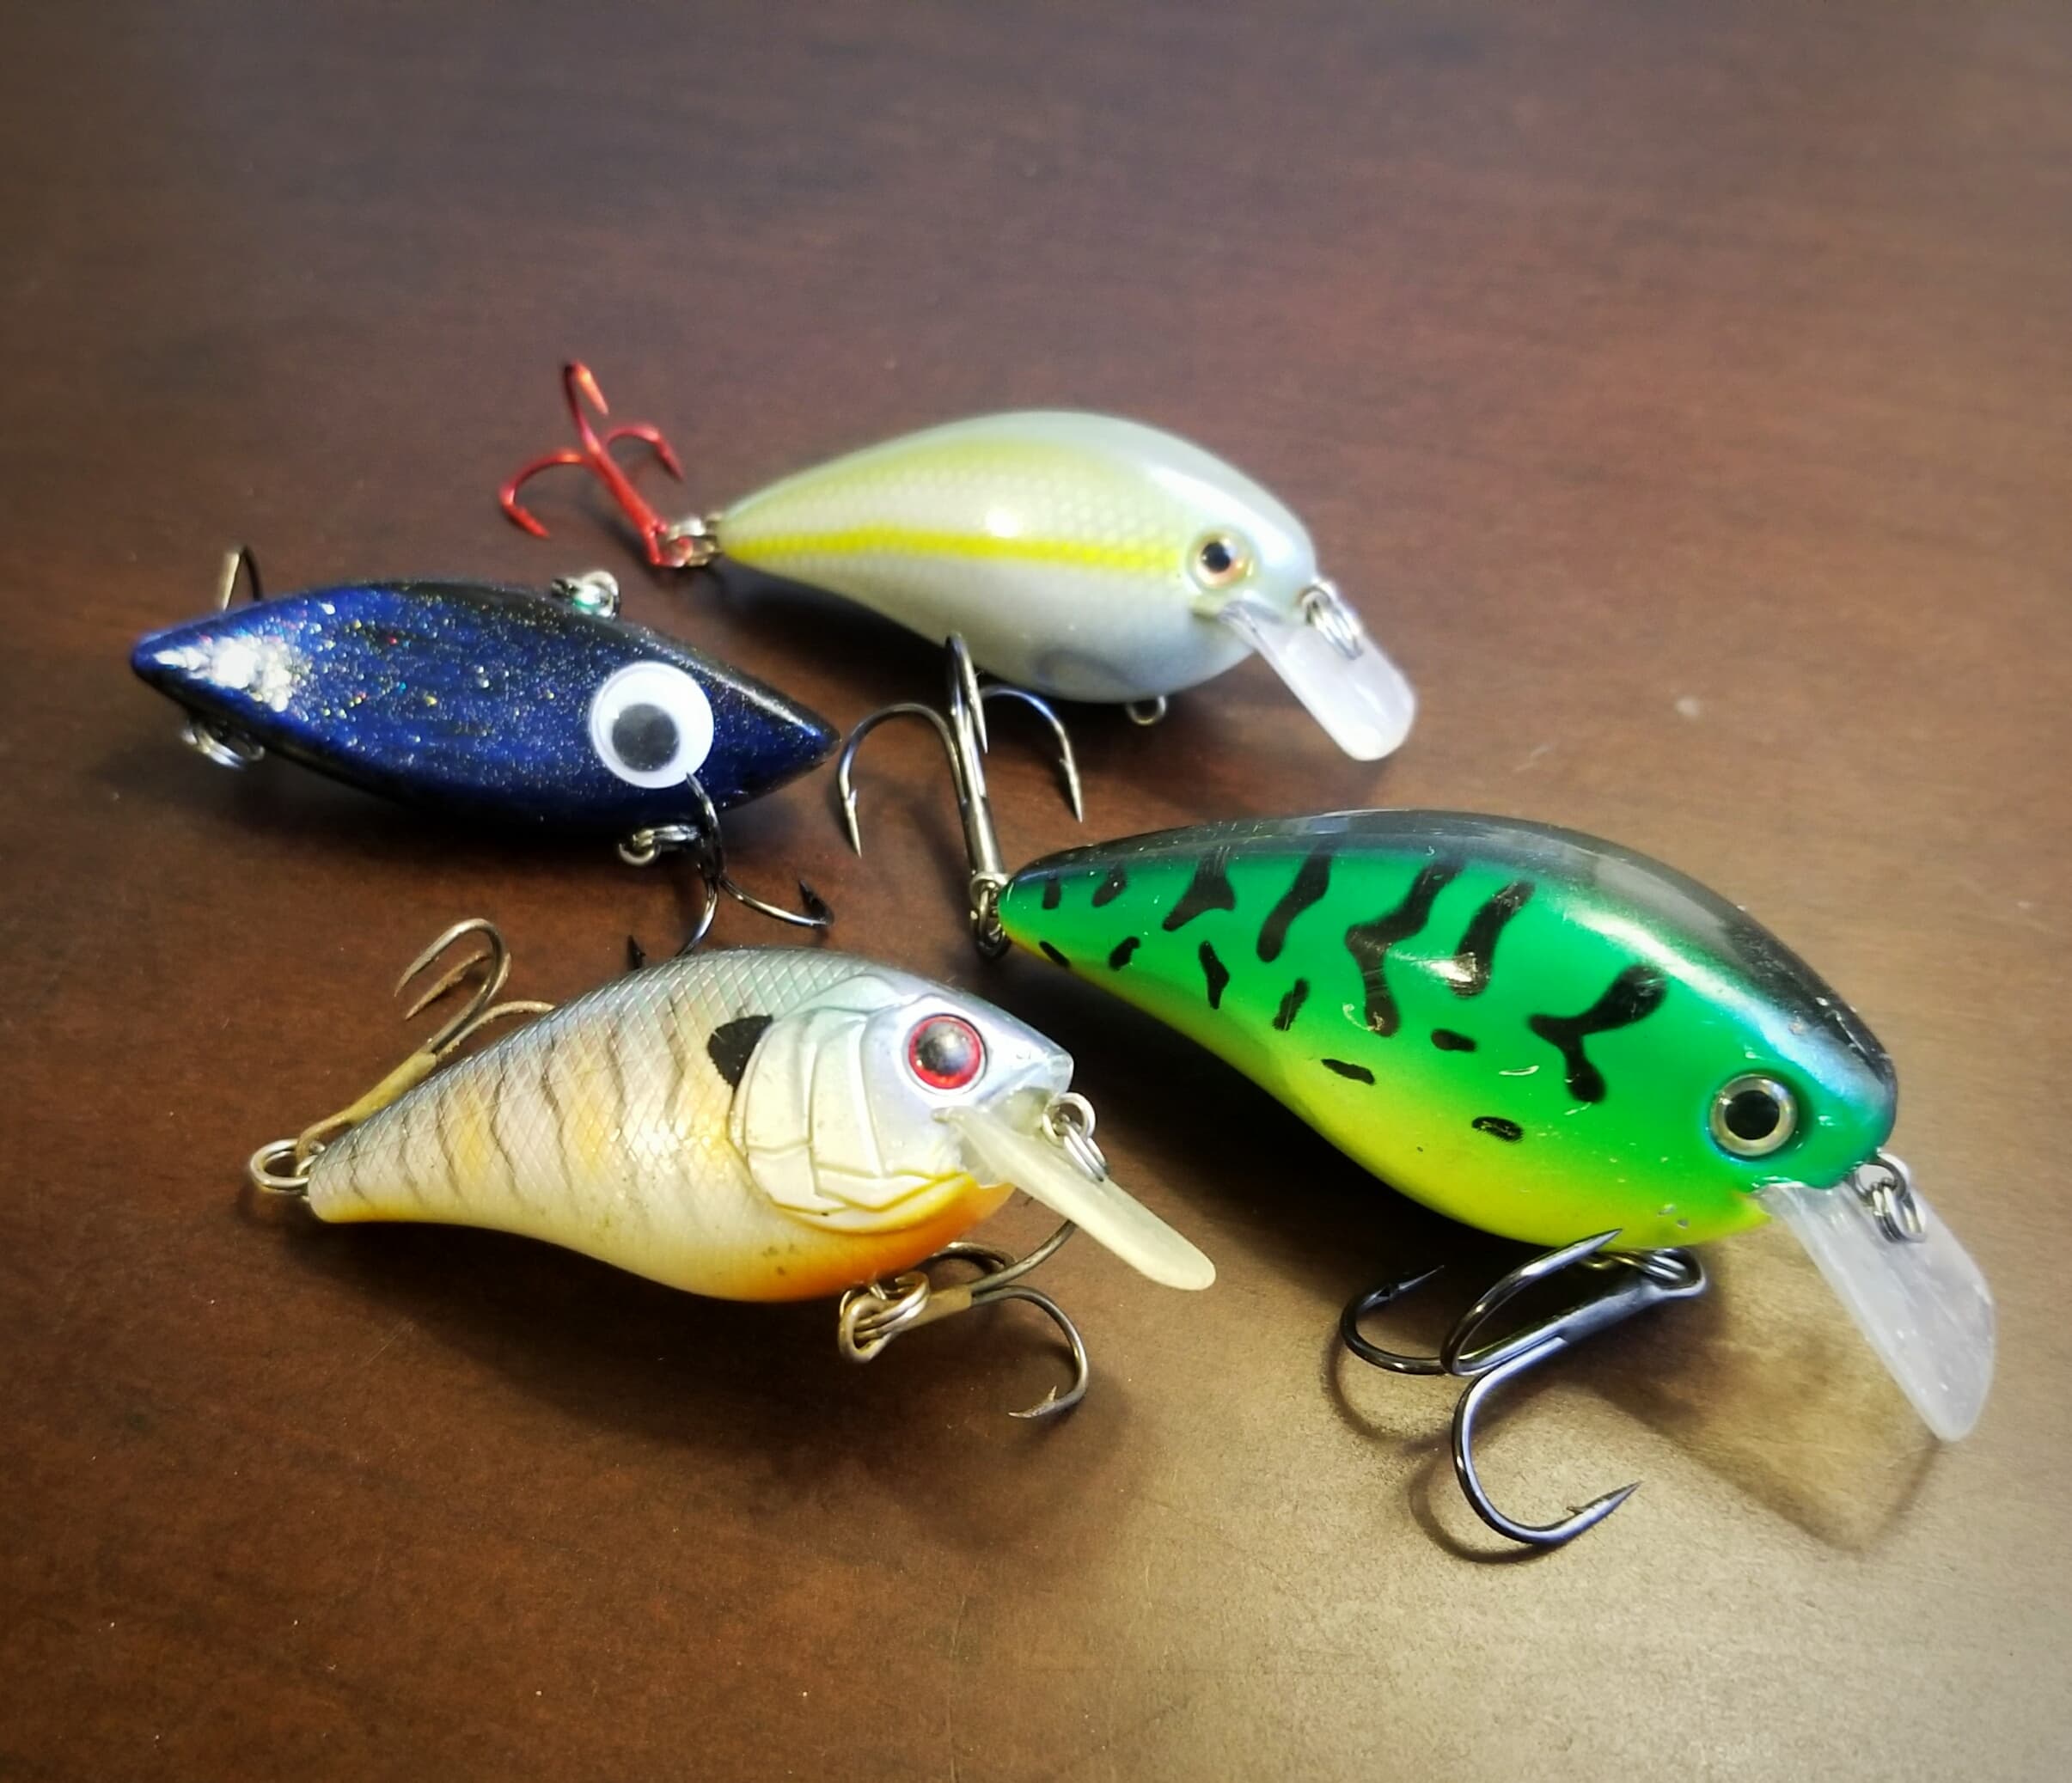 Four crank baits fully restored with new hardware